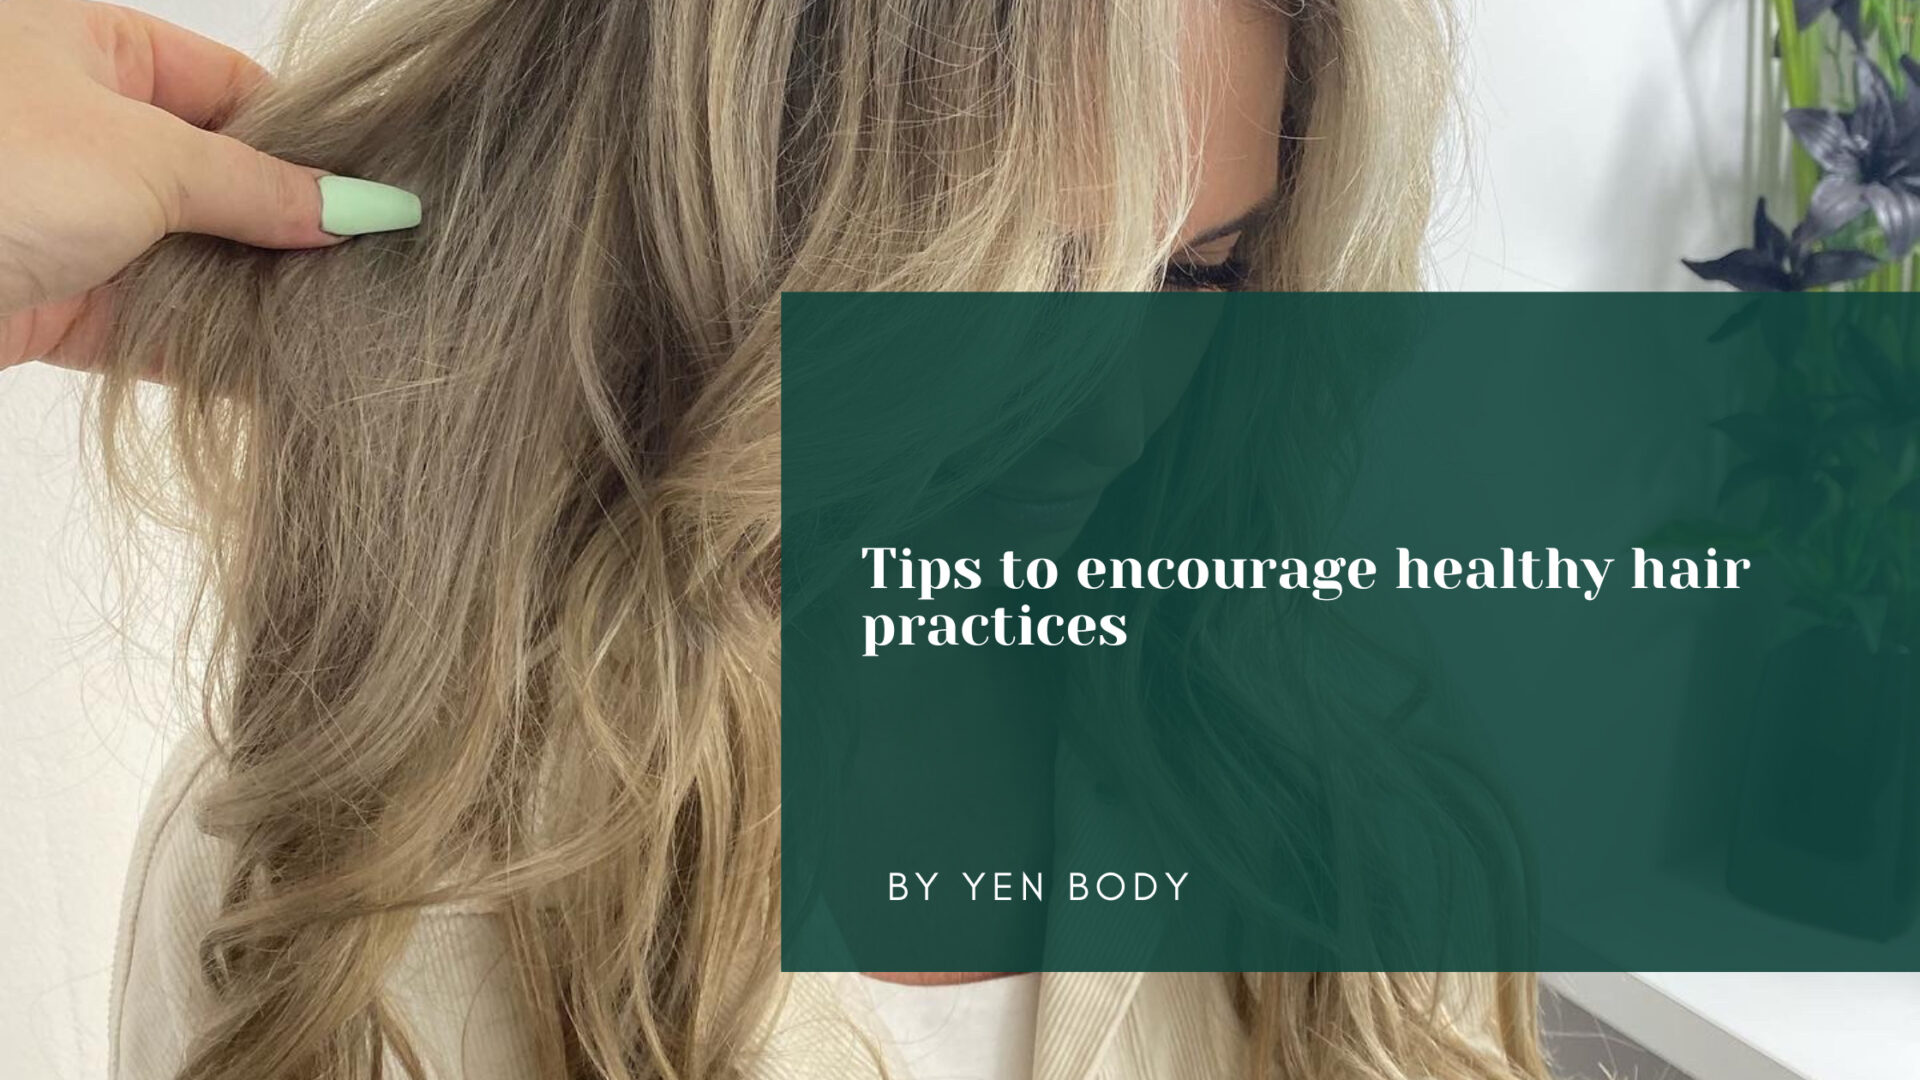 Tips to encourage healthy hair practices